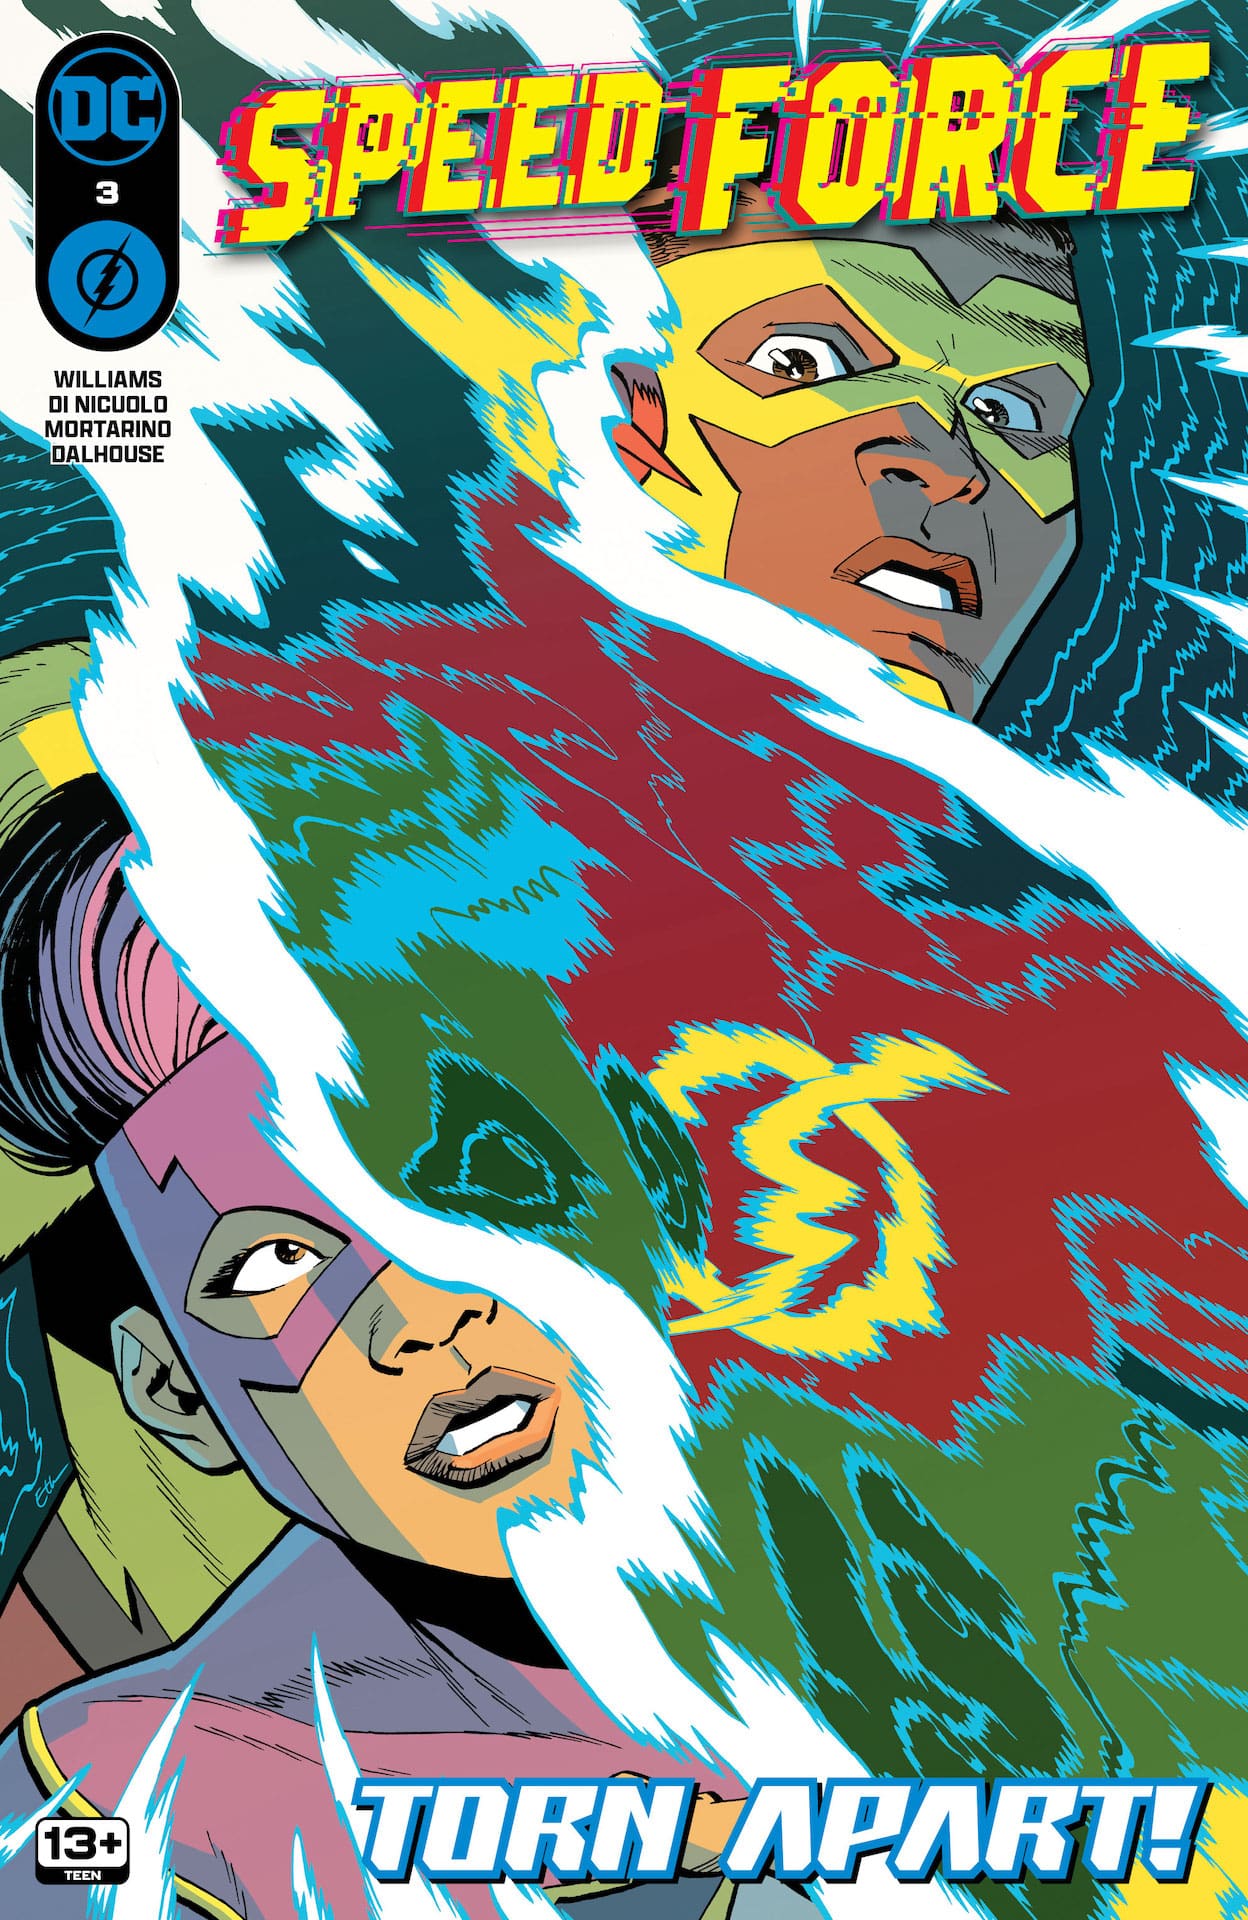 DC Preview: Speed Force #3